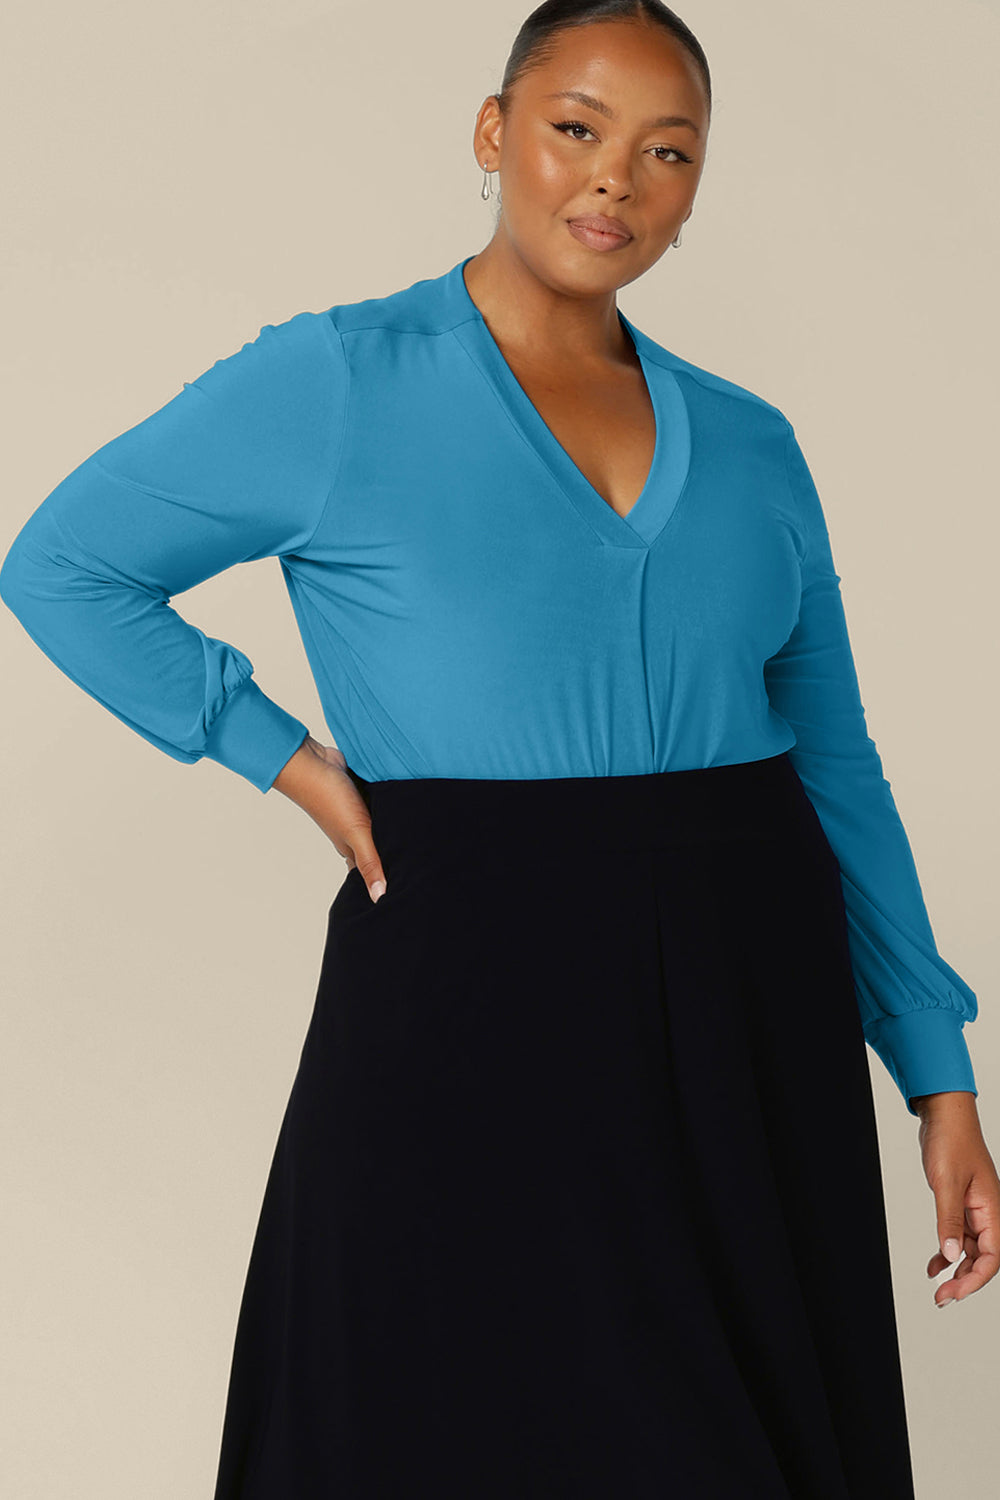 A fuller figure woman wears a V-neck top in size 18 with long bishop sleeves in Opal blue stretch jersey. Made in Australia by Australian and New Zealand women's clothing label, L&F, this workwear top is available to shop in an inclusive size range of sizes 8 to 24.